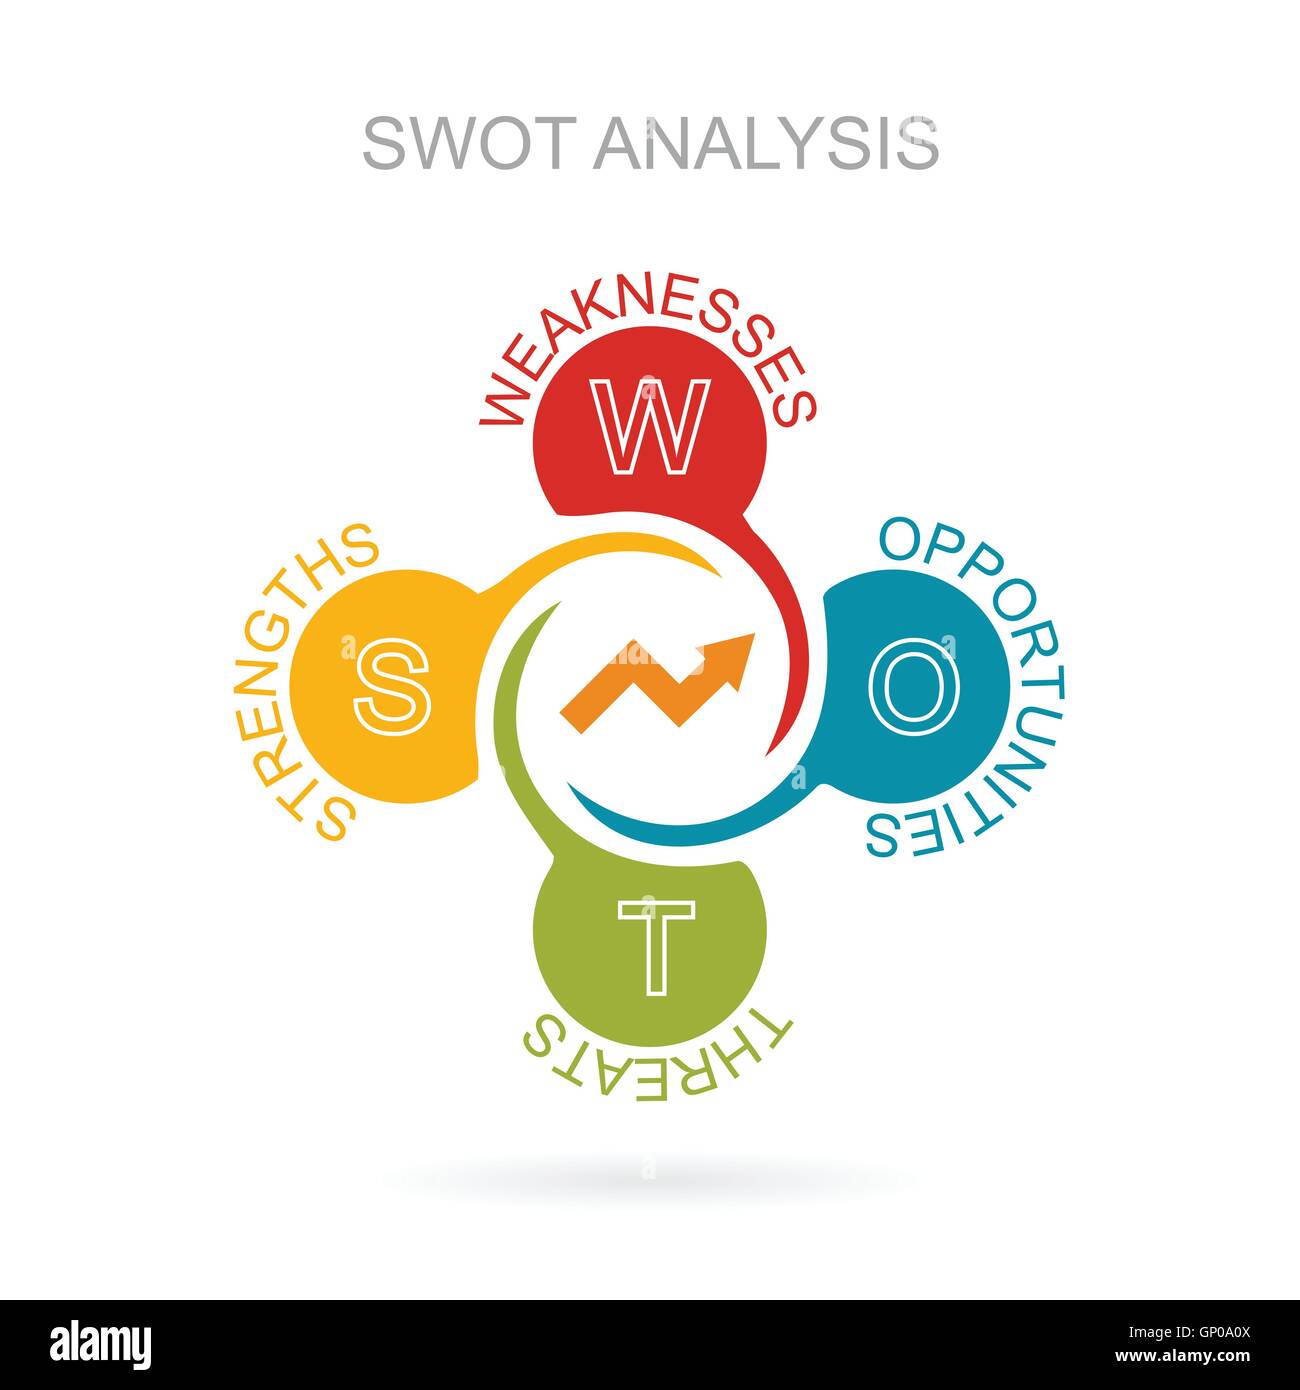 swot analysis business growing strategy concept vector illustration Stock Vector